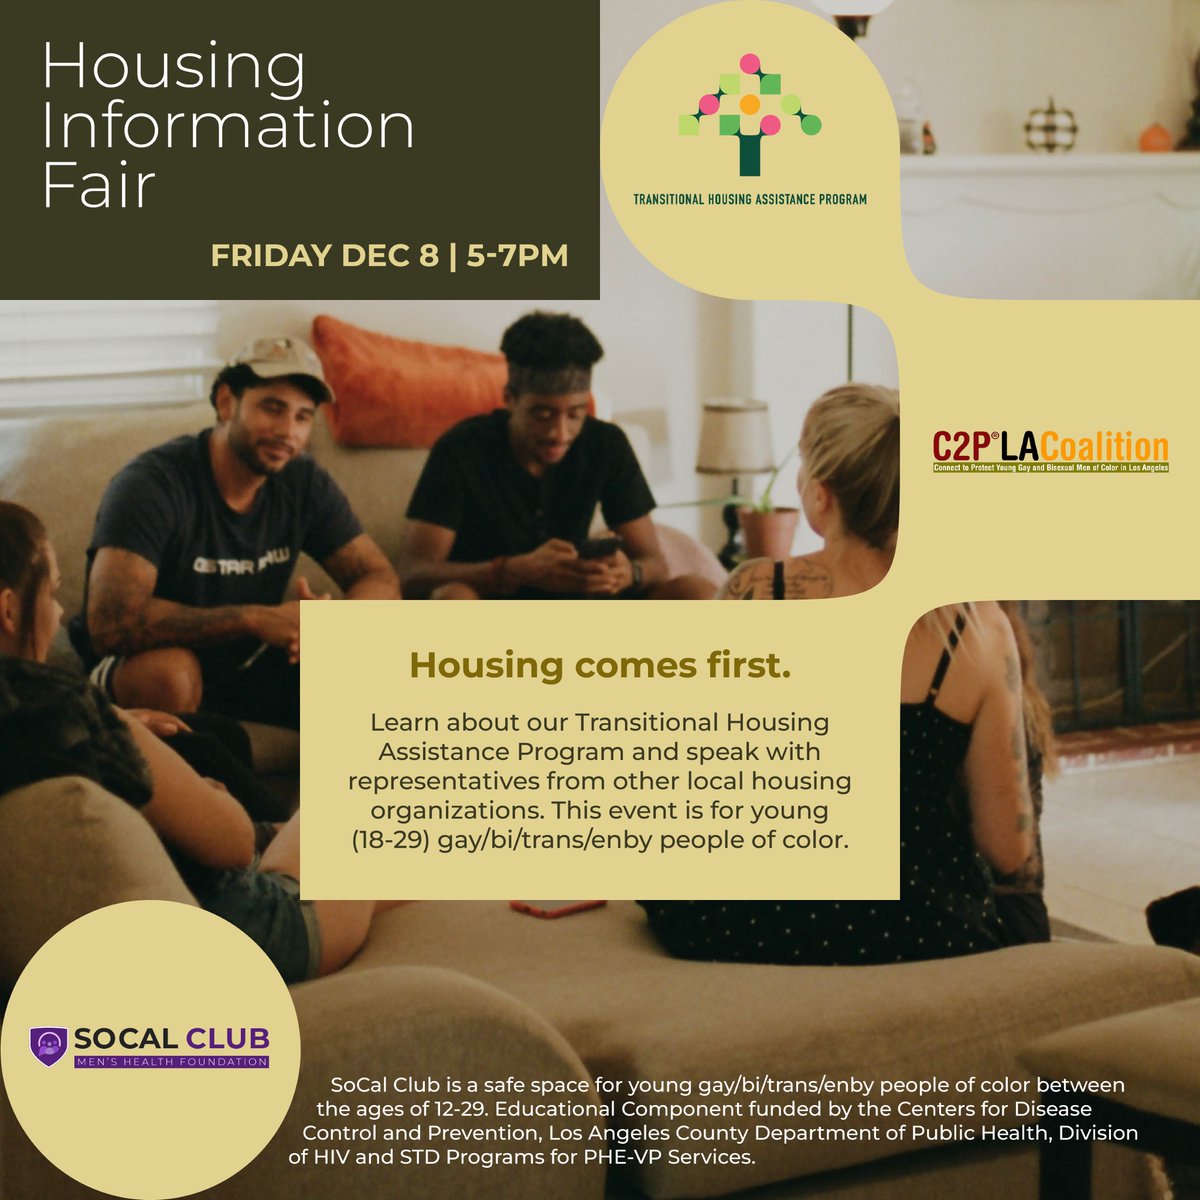 Housing comes first 💚 Attend our housing information fair next week to learn more about local housing organizations and THAP, our Transitional Housing Assistance Program 🌳

#housing #transitionalhousing #southla #gaysouthla #lahousing #socalclub #thap